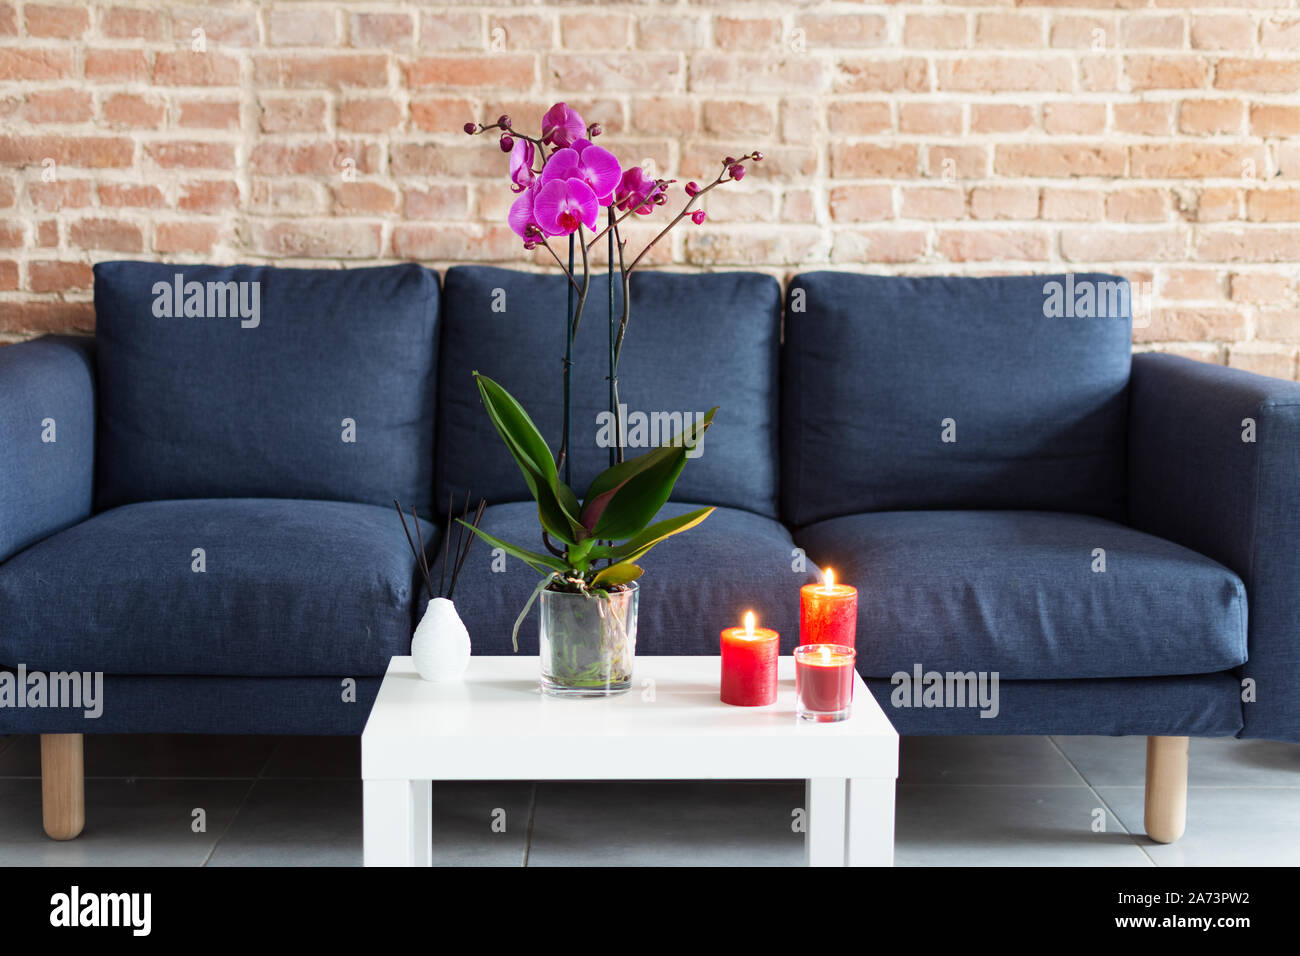 Living room table with orchid flowerpot, candles and air refresher sticks in modern interior design. Stock Photo